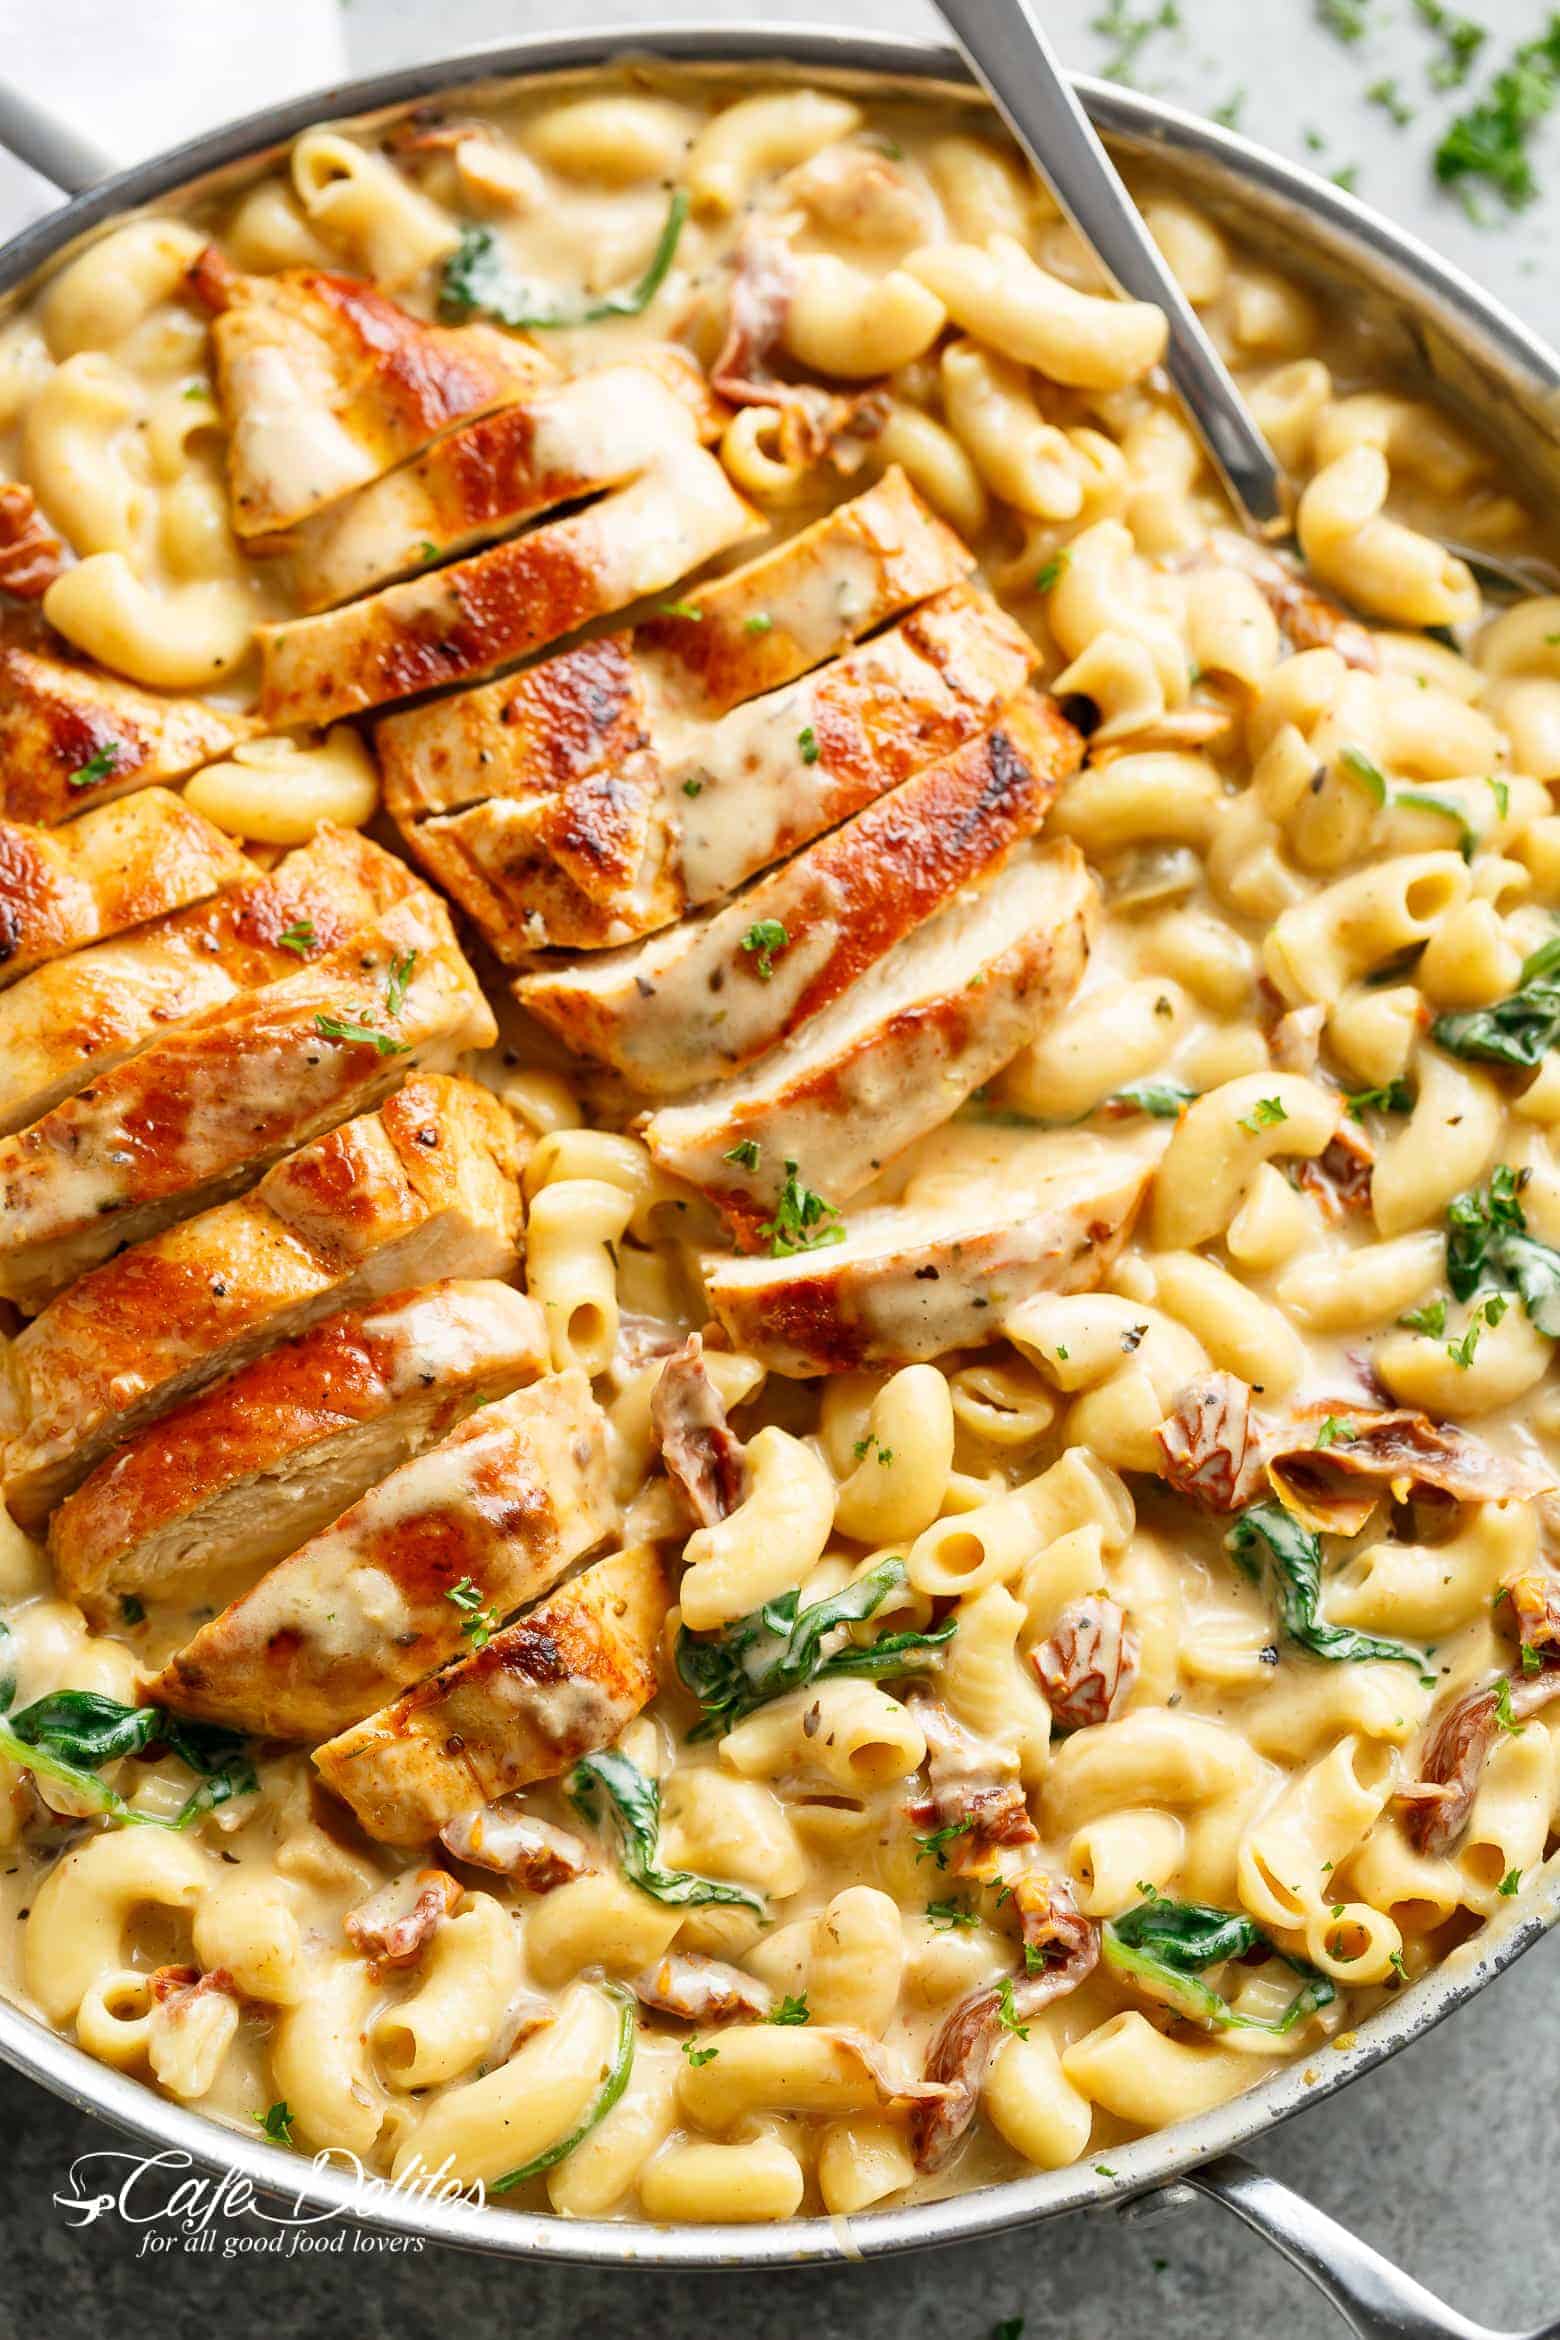 A silver frying pan filled with creamy tuscan style Mac and cheese with wilted spinach and sun dried tomato strips! Two sliced chicken breasts sit on top of Mac and cheese with a serving spoon in the pan ready to serve!